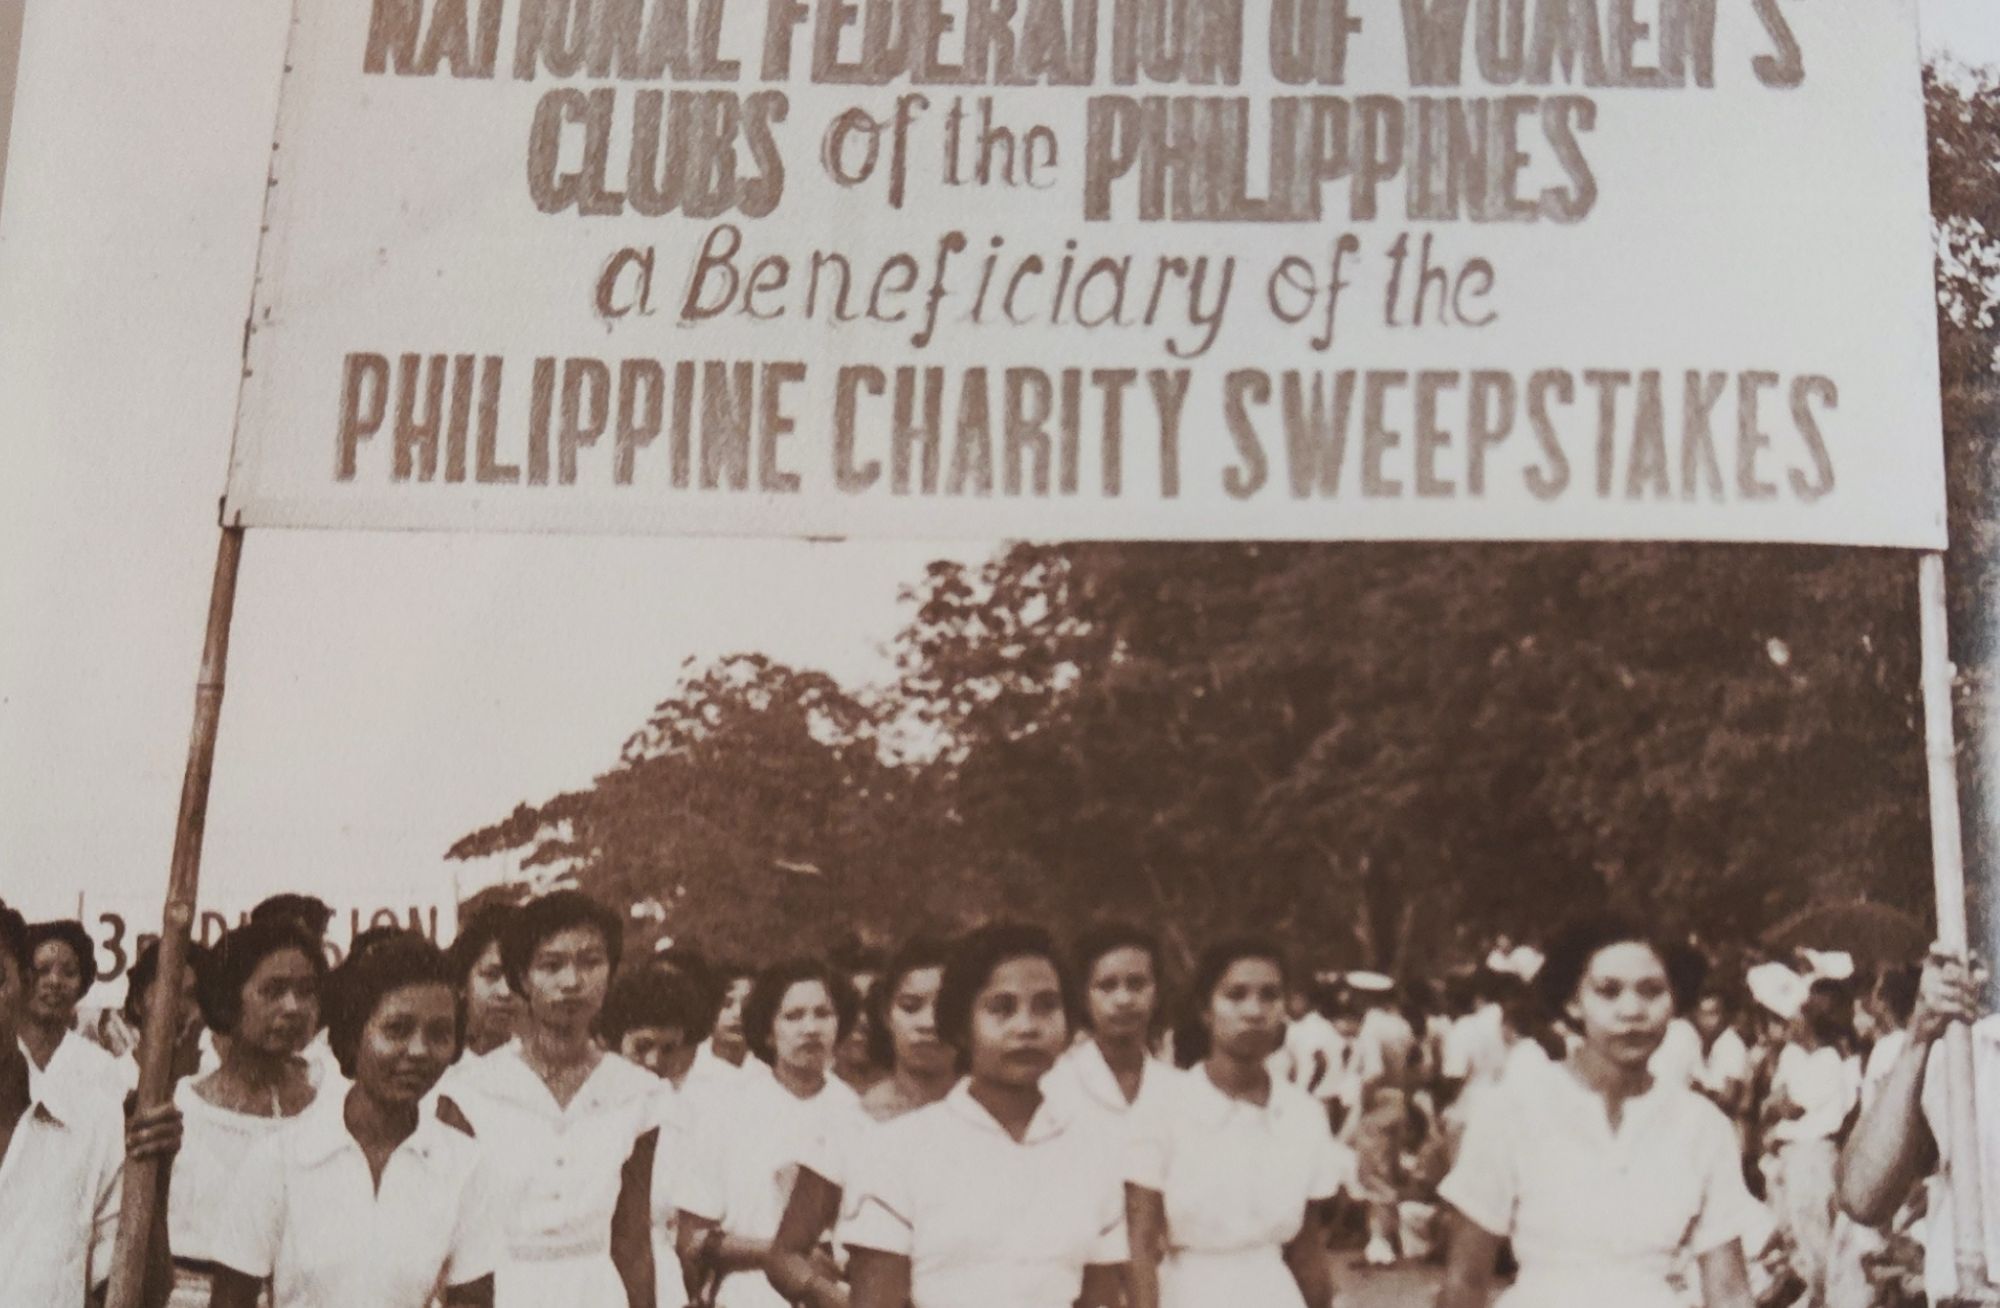 NFWC joins the Philippine Charity Sweepstakes in a parade